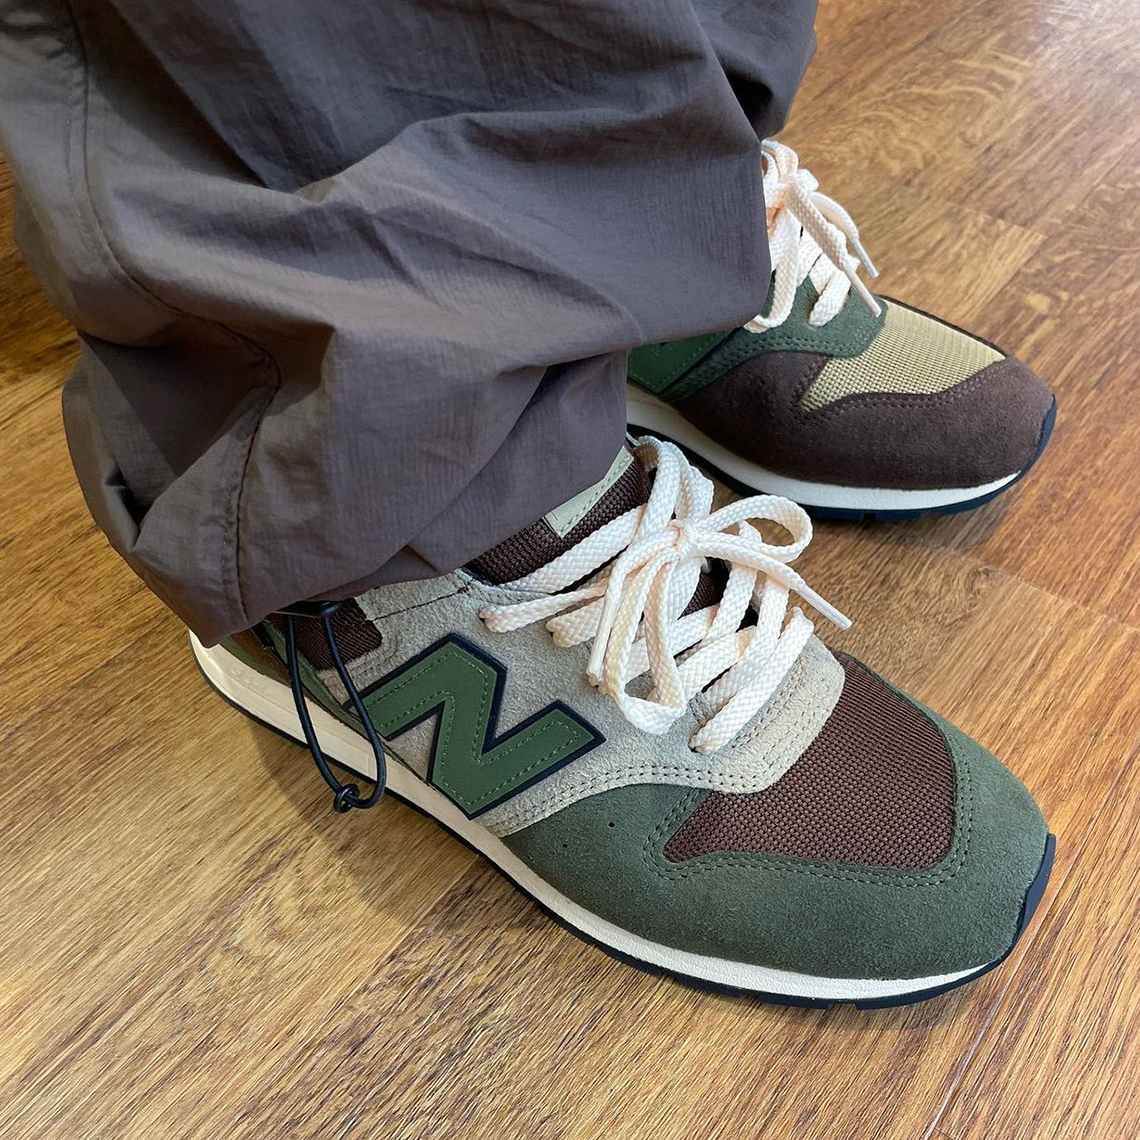 Beams New Balance 576 Release Date 1